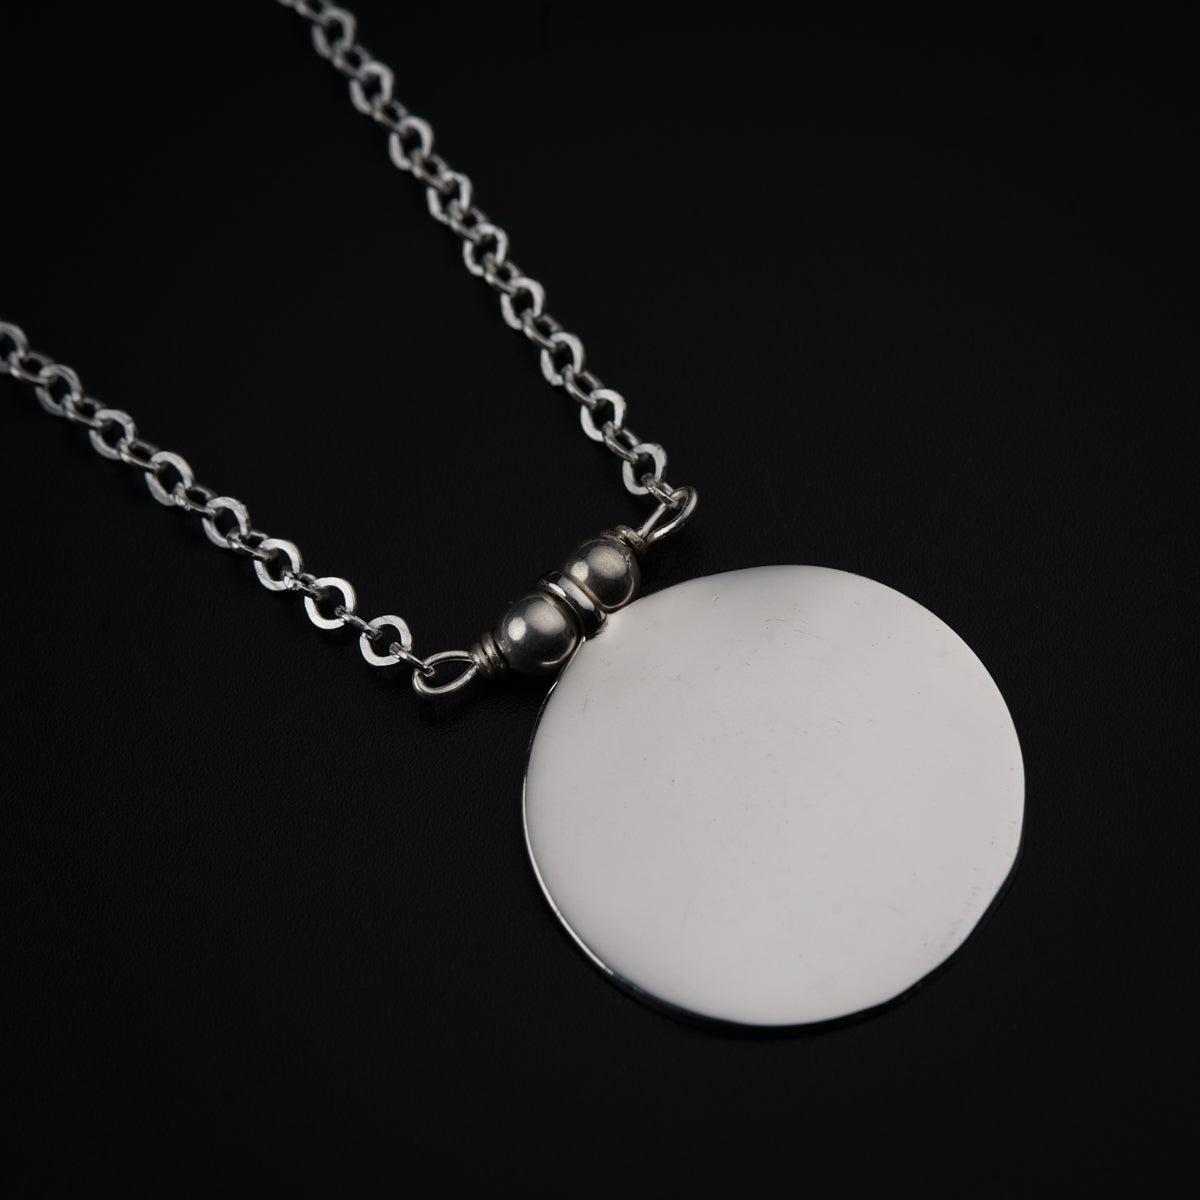 a silver necklace with a white disc on a chain